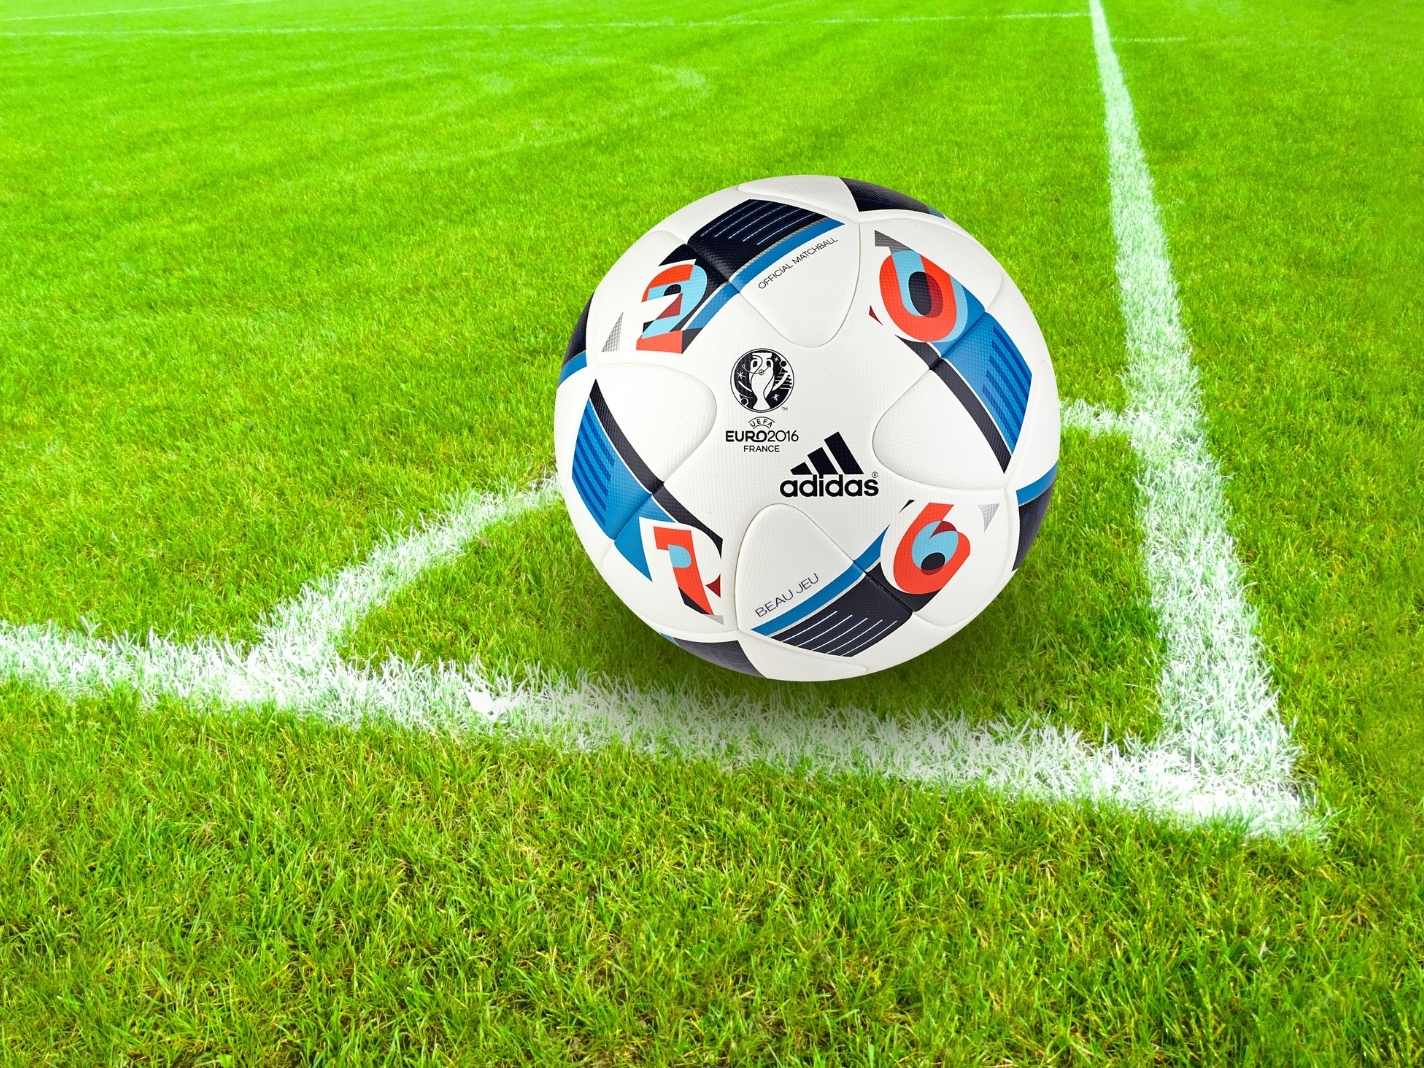 Adidas suspends partnership with Russian Football Federation